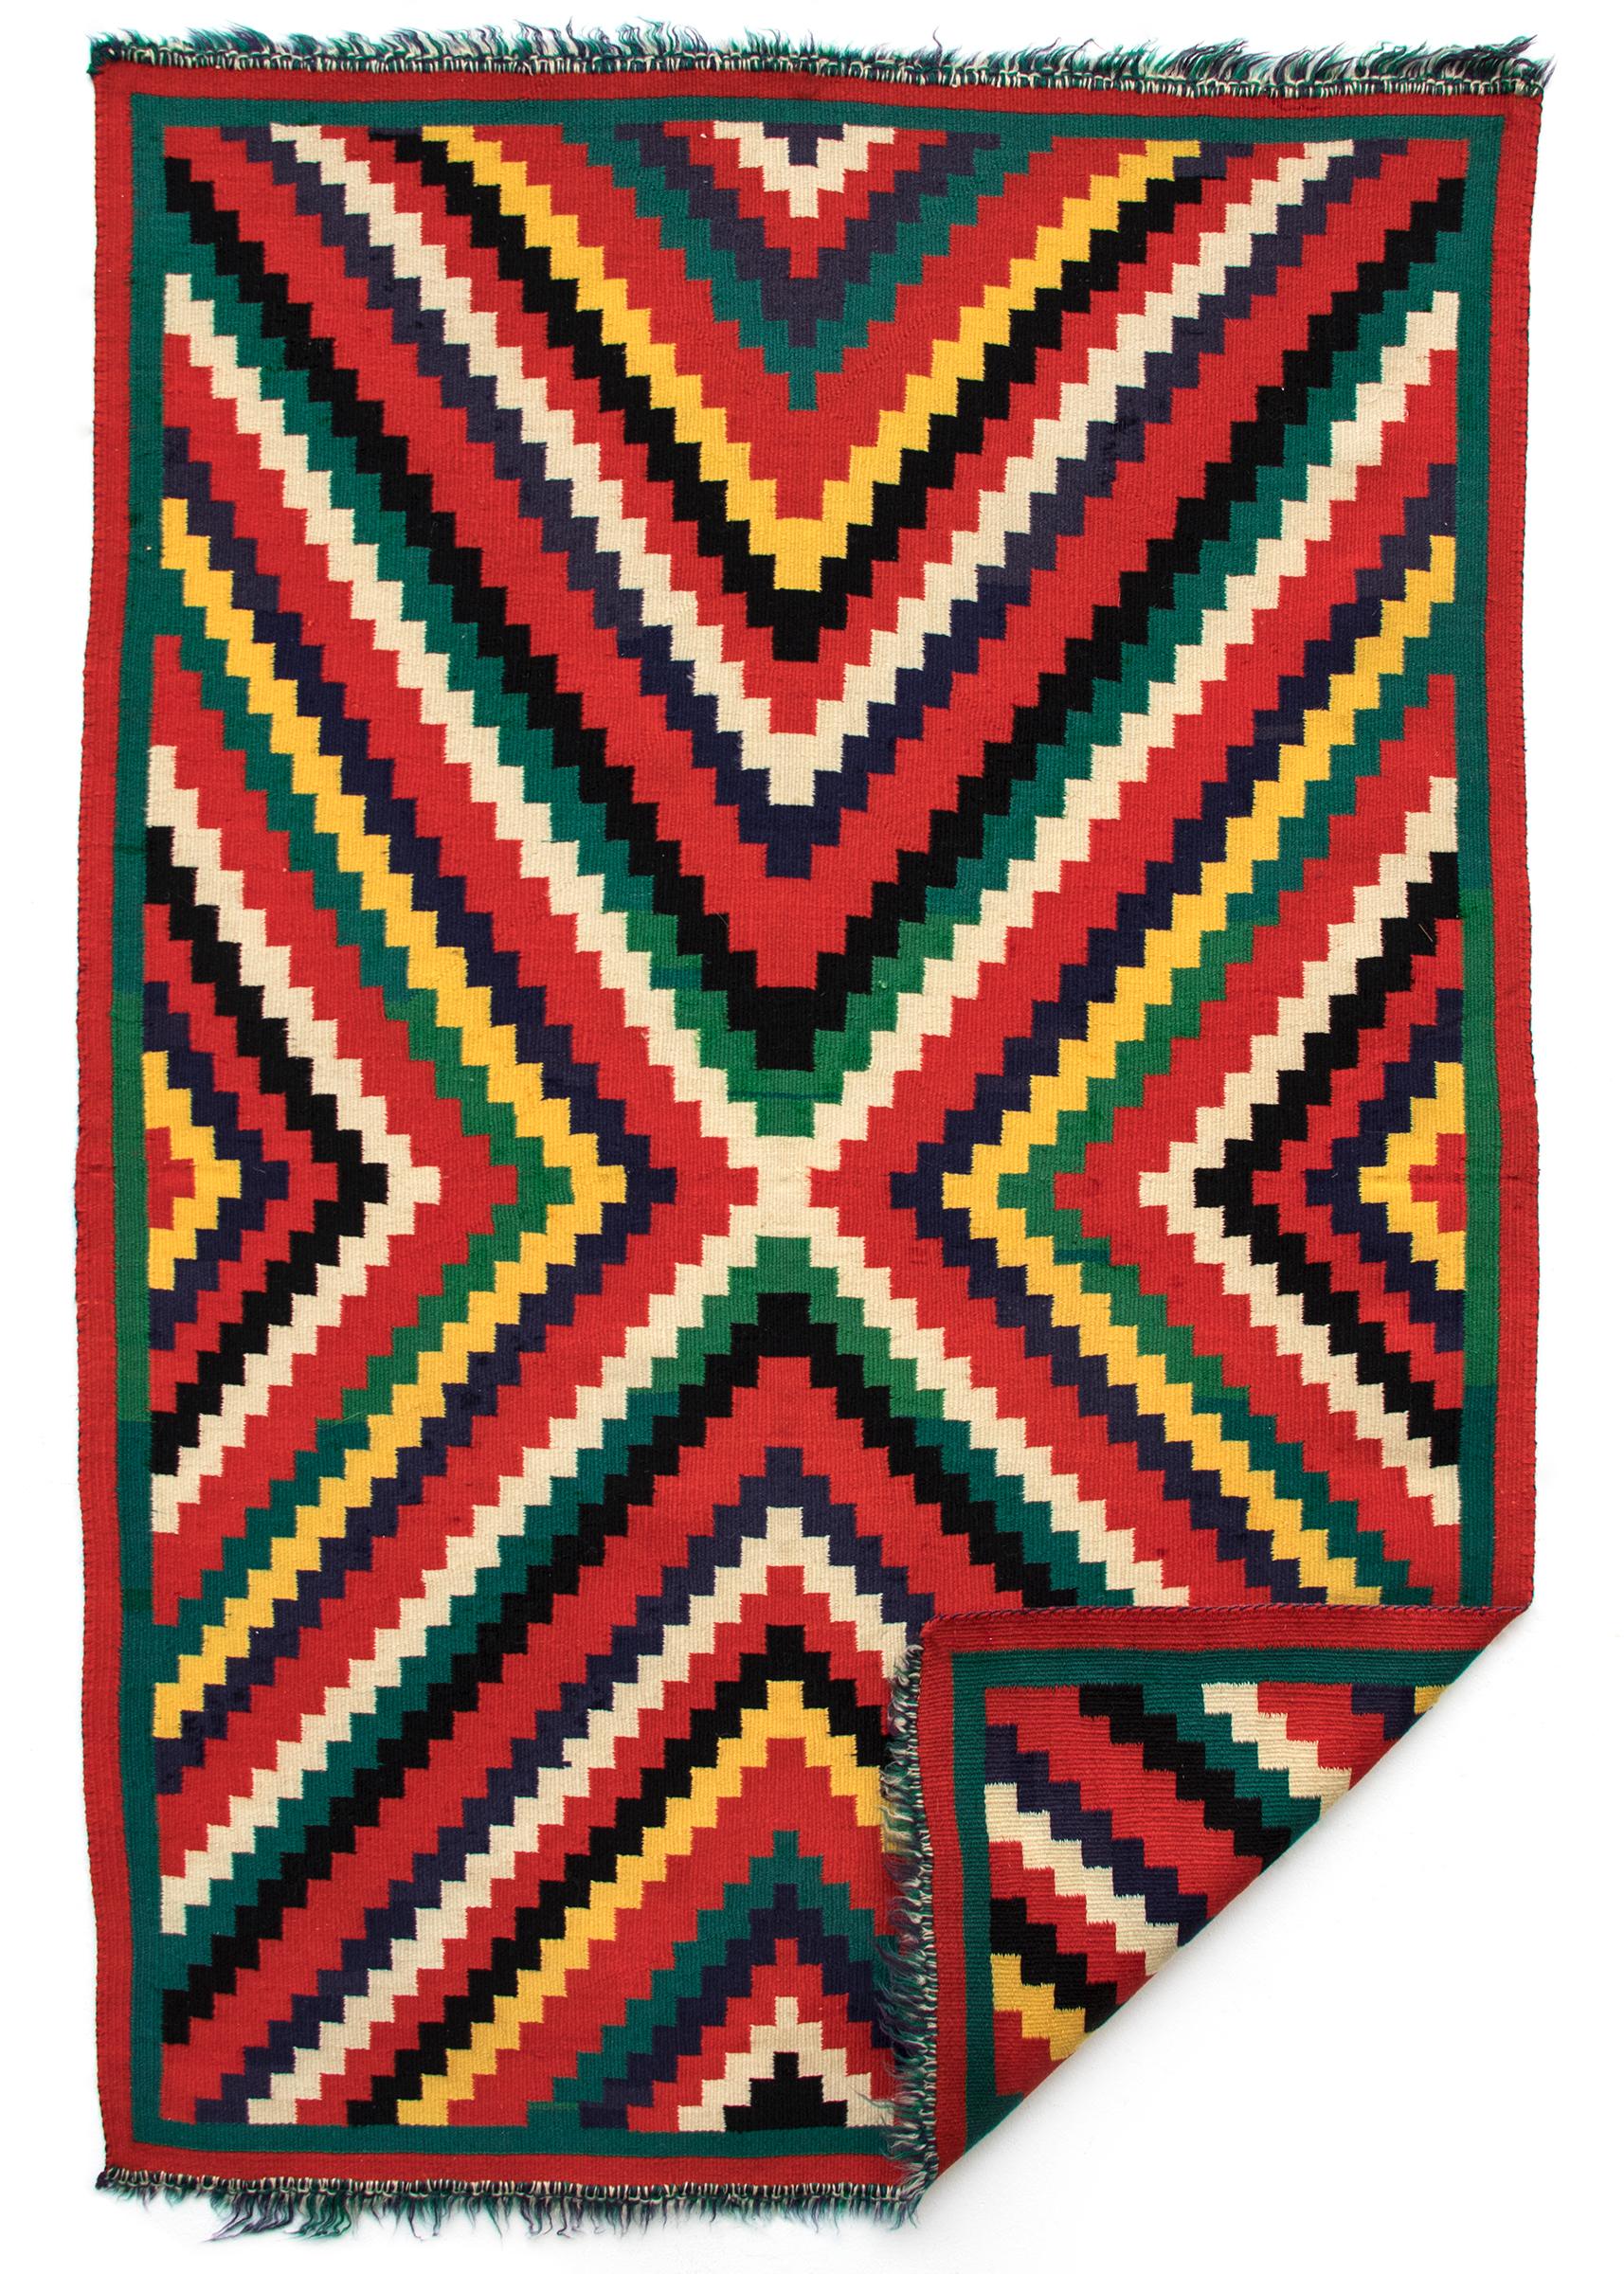 19th century circa 1890 Navajo blanket textile woven of Germantown Yarns in an Eyedazzler pattern of vibrant colors including red, green, yellow, black and white. Germantown textiles like this were woven by Native American Navajo weavers in the late